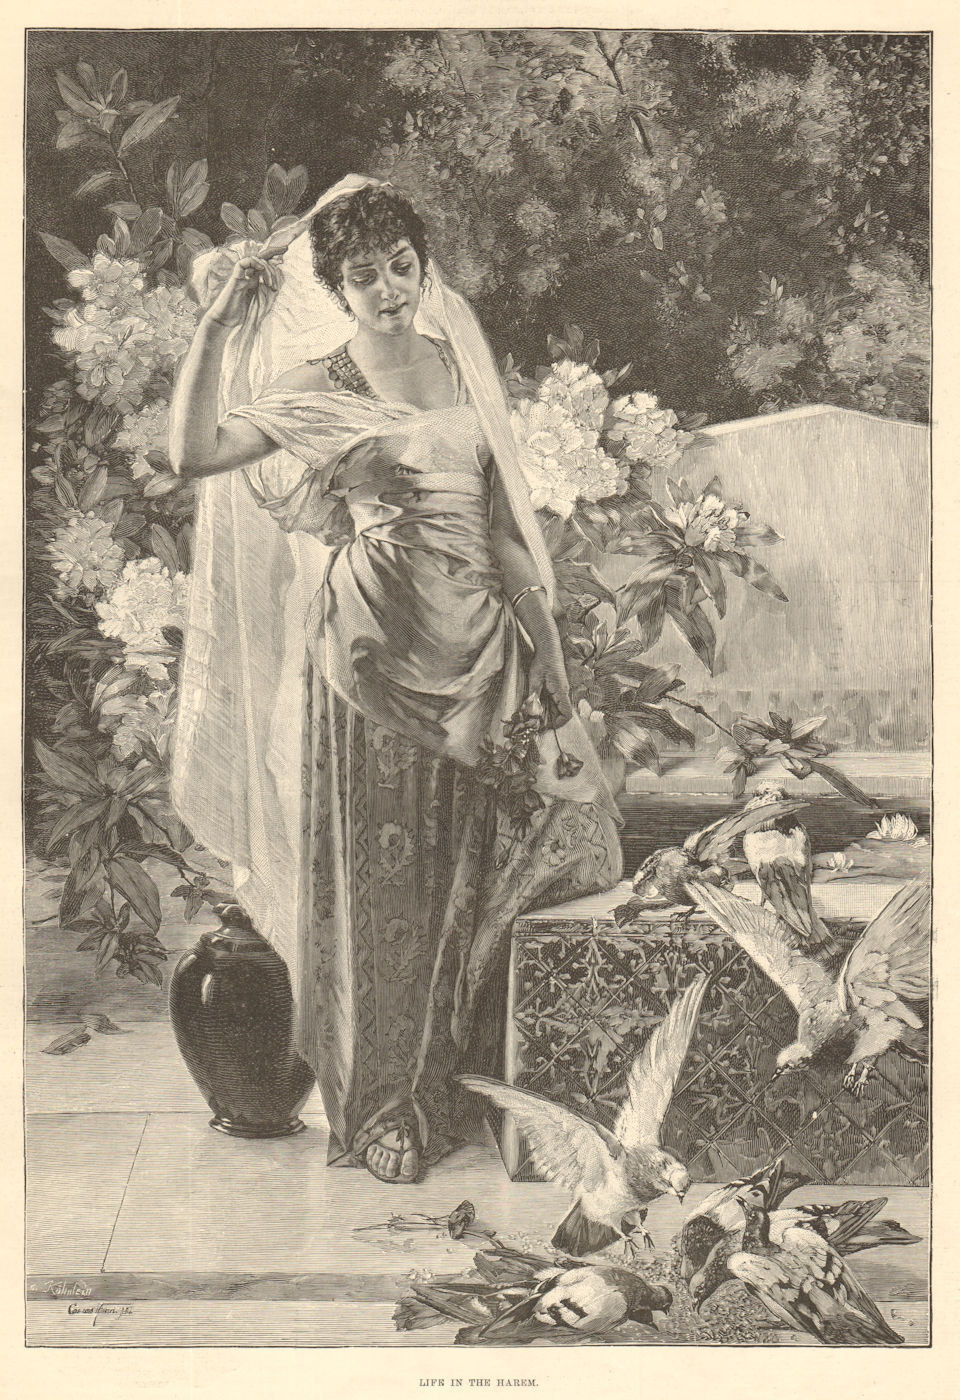 Associate Product Life in the harem. Pretty Ladies. Birds 1893 antique ILN full page print